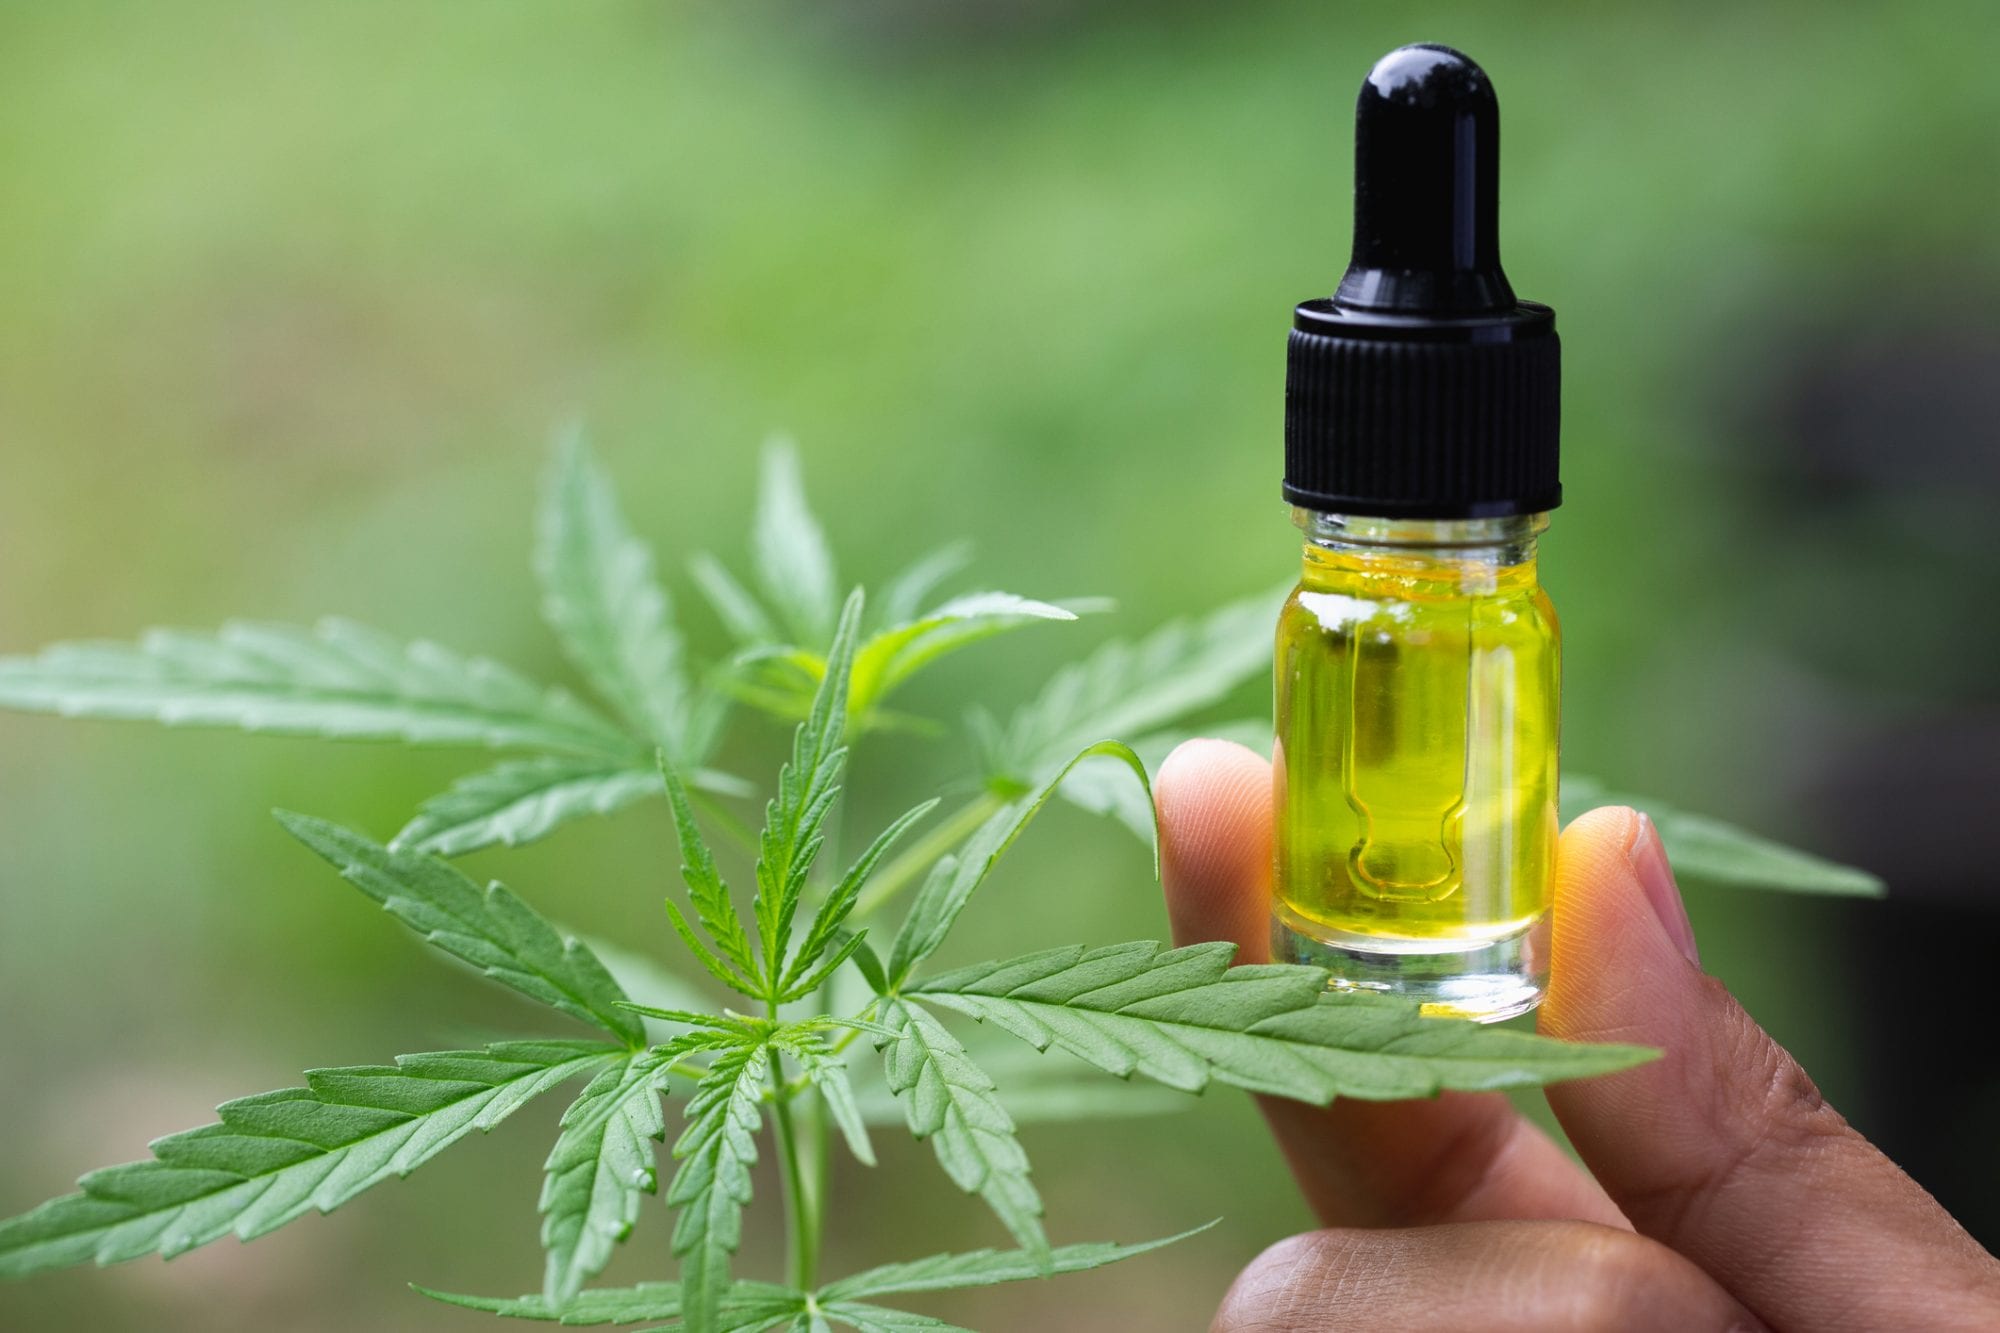 INFORMATION ABOUT CBD OIL HOW ITS WORK